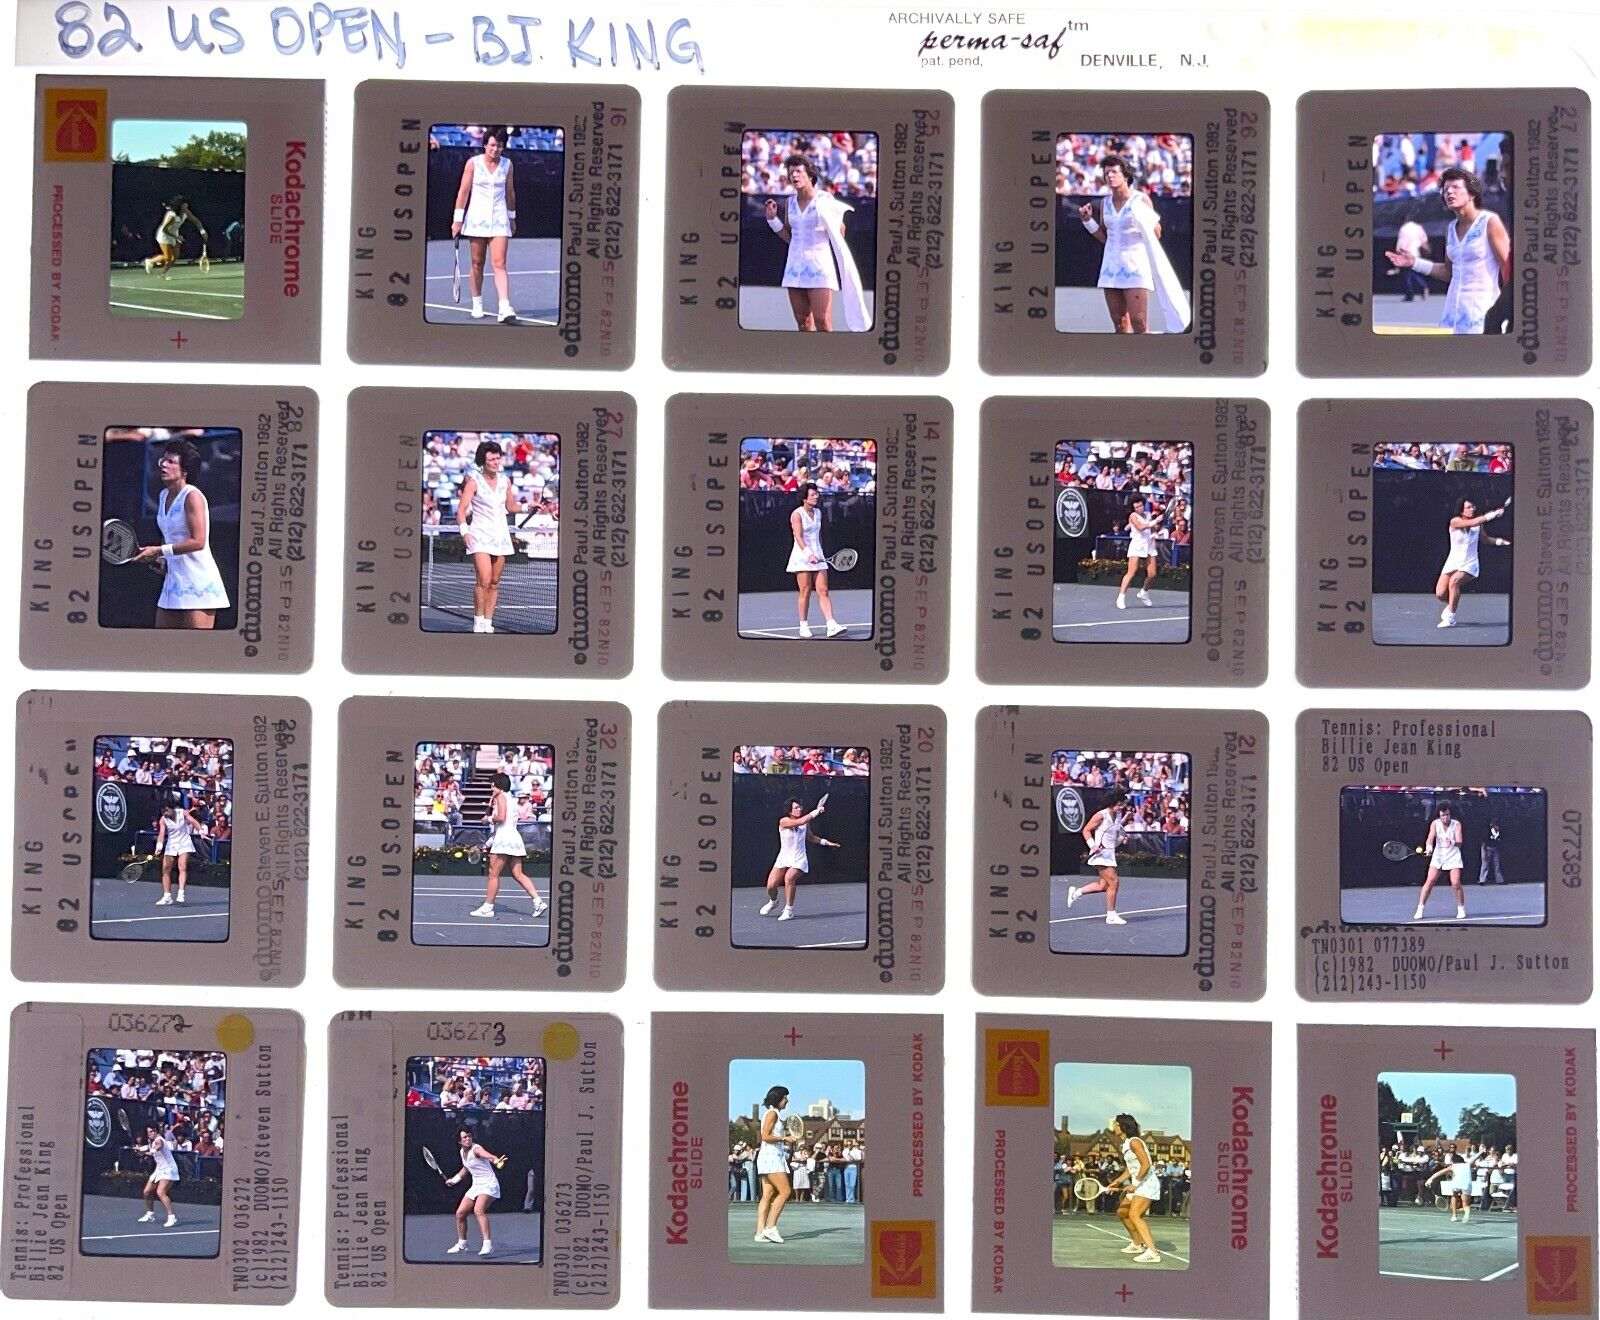 LG13-8 \'82 US OPEN BILLY JEAN KING TENNIS (20 PC LOT) 35MM COLOR TRANSPARENCIES